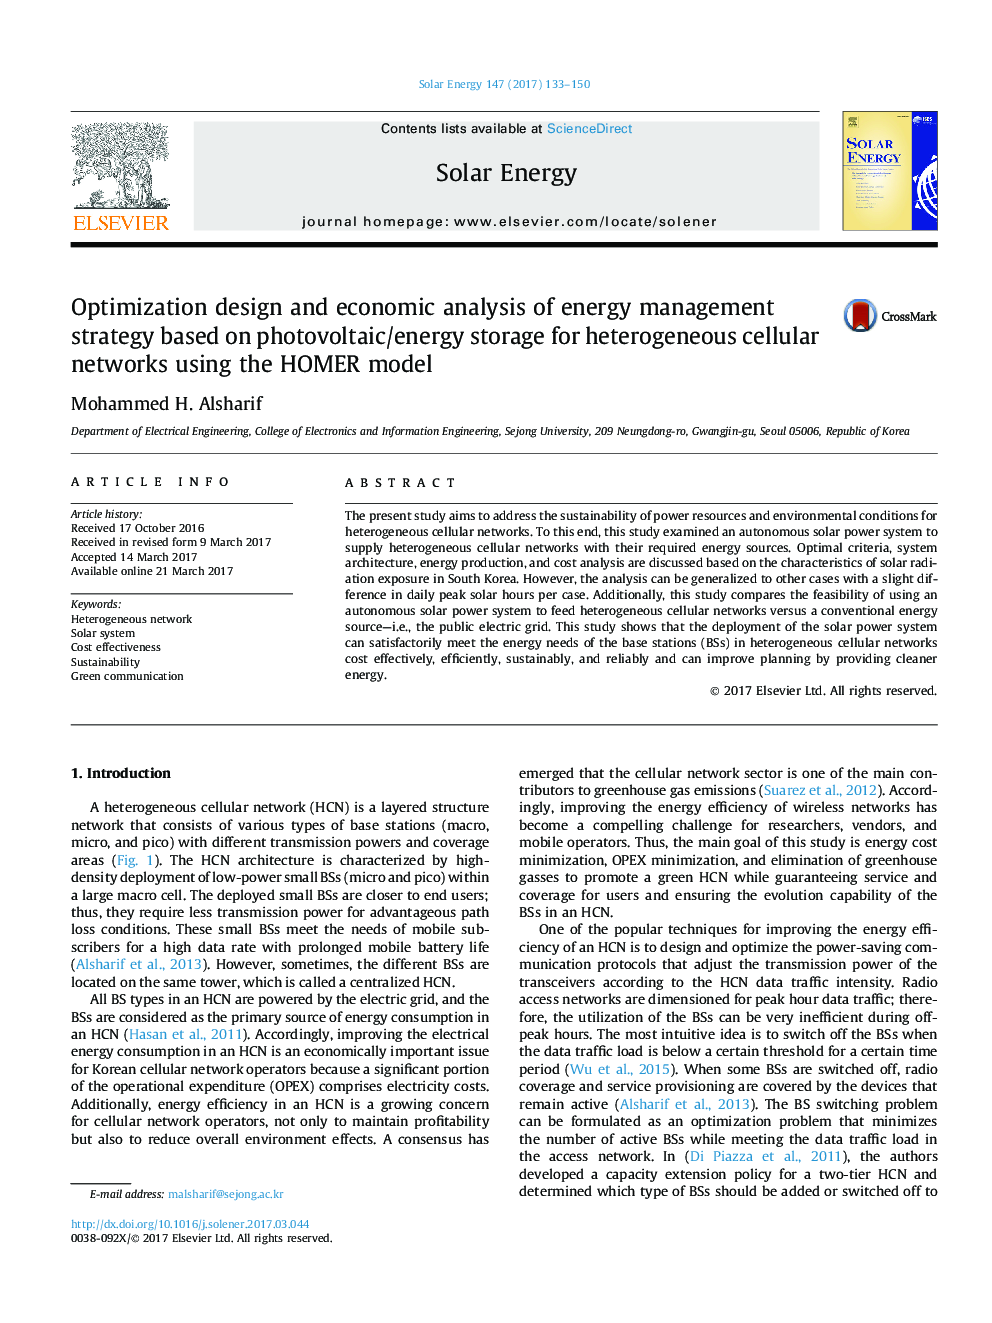 Optimization design and economic analysis of energy management strategy based on photovoltaic/energy storage for heterogeneous cellular networks using the HOMER model